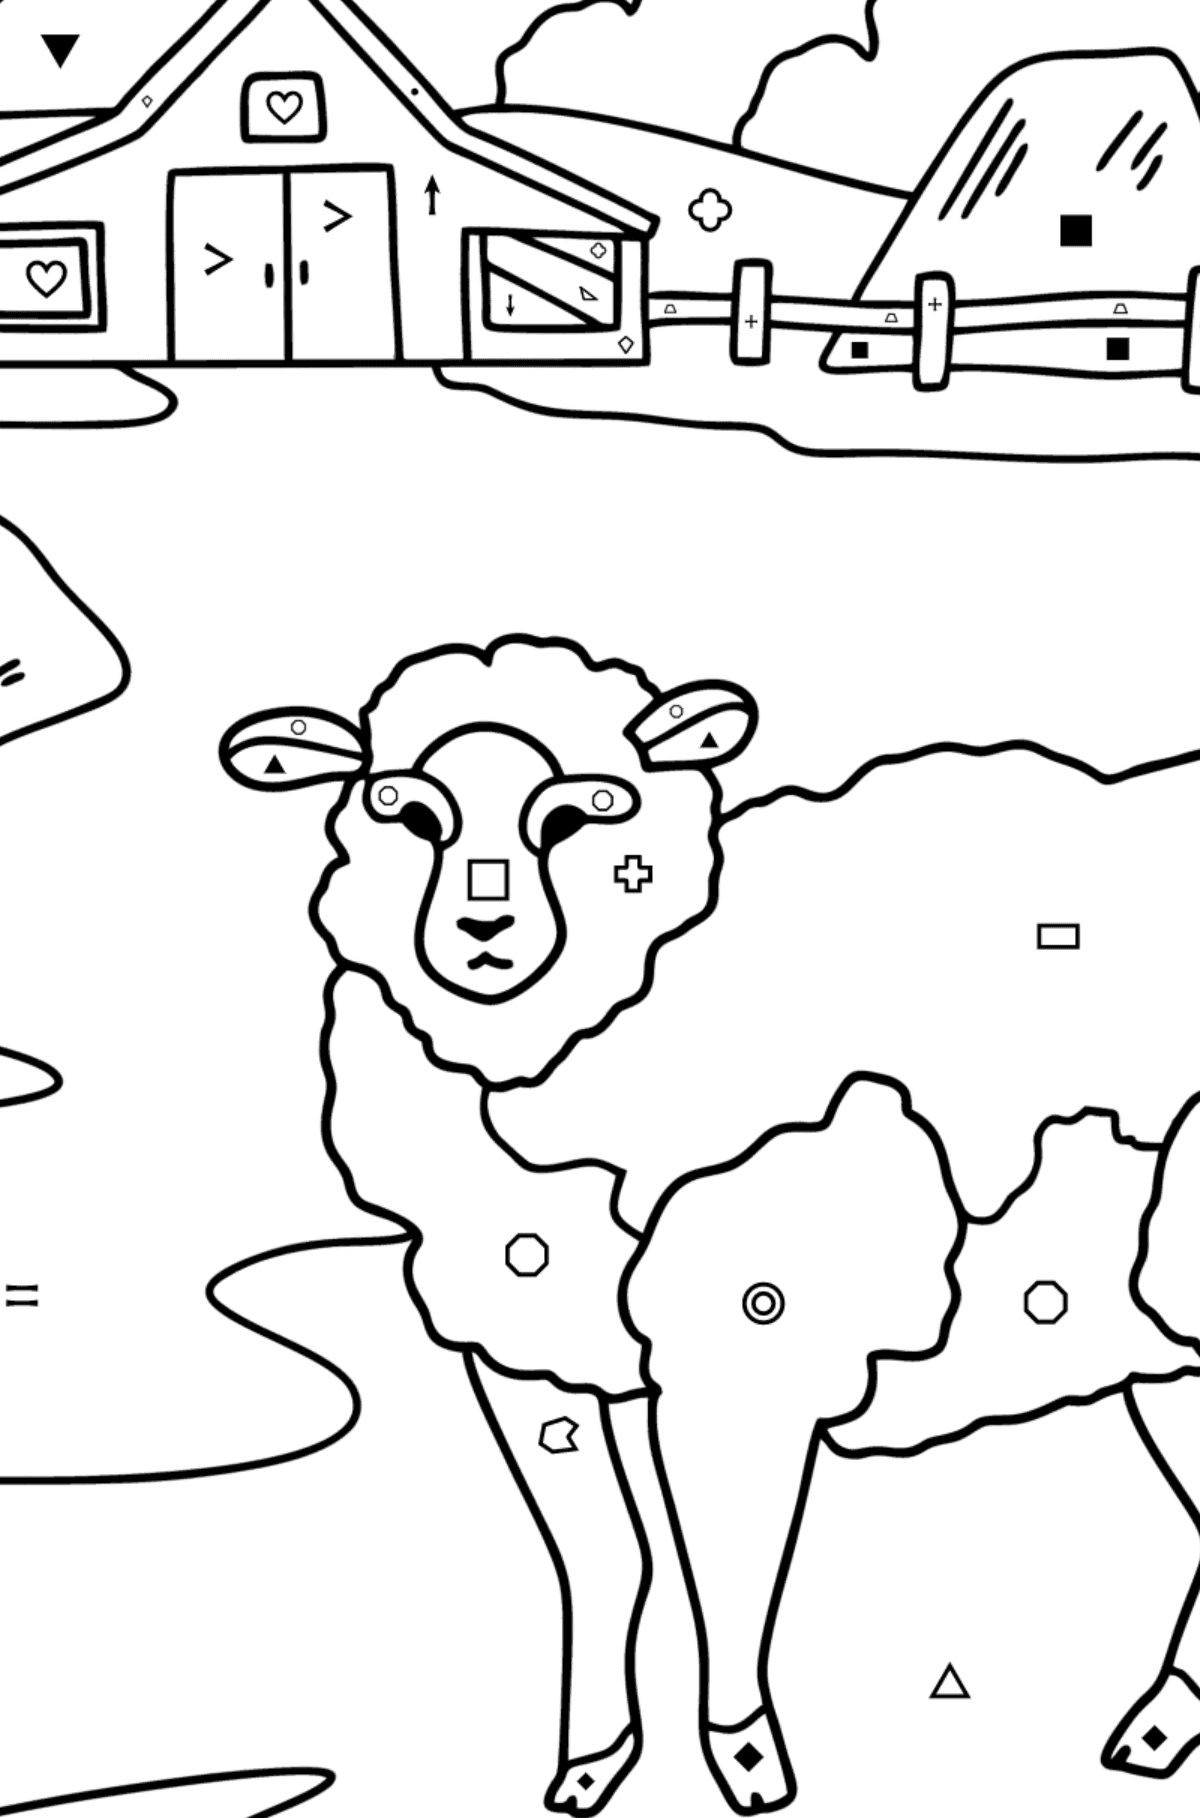 Farm coloring page - Coloring by Symbols and Geometric Shapes for Kids